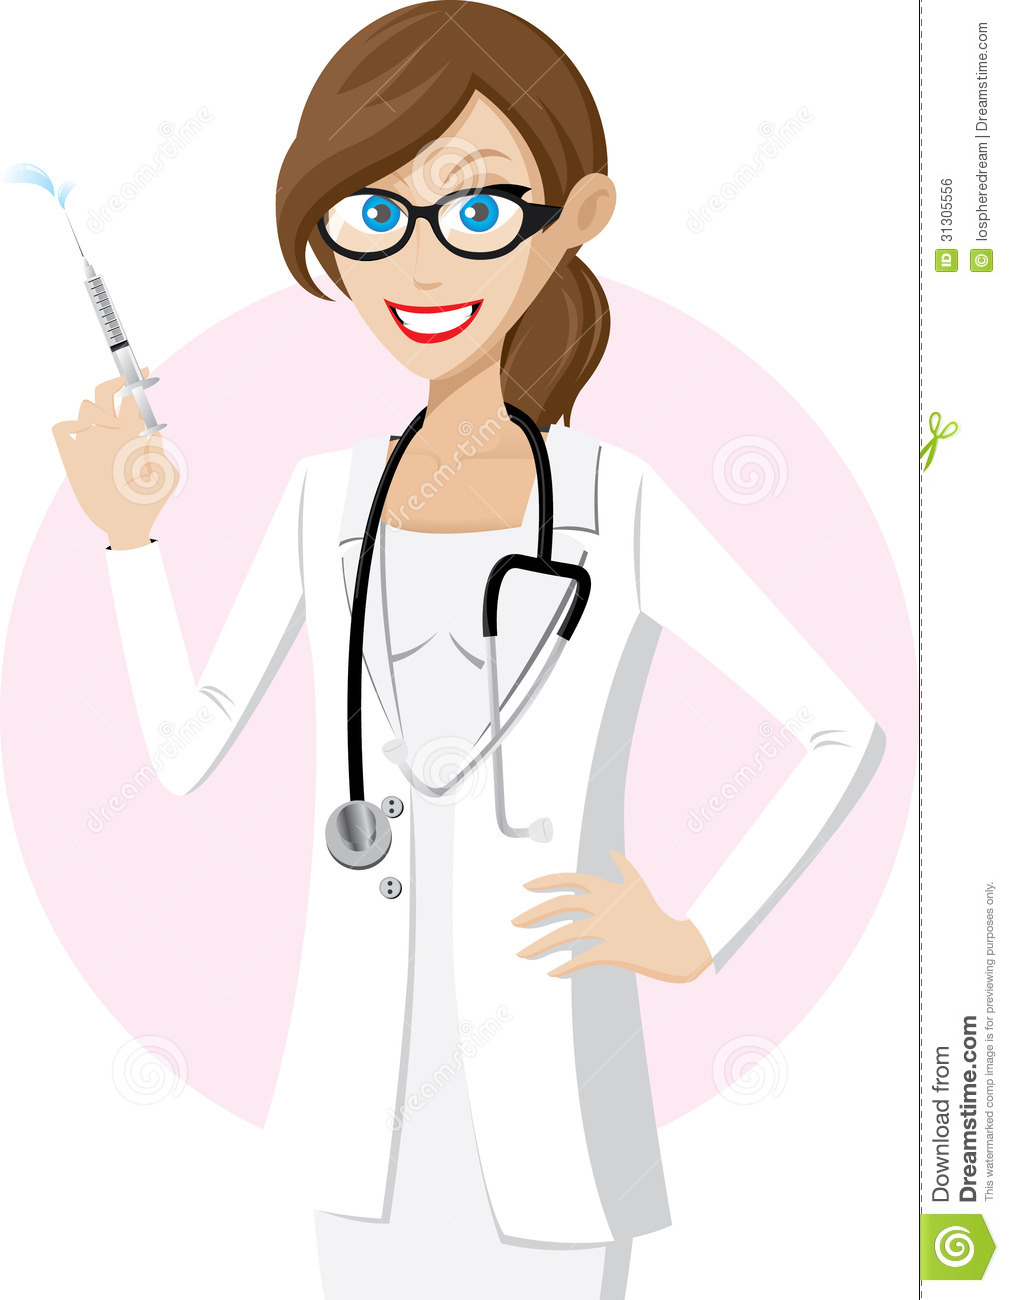 girl at doctors clipart - Clipground